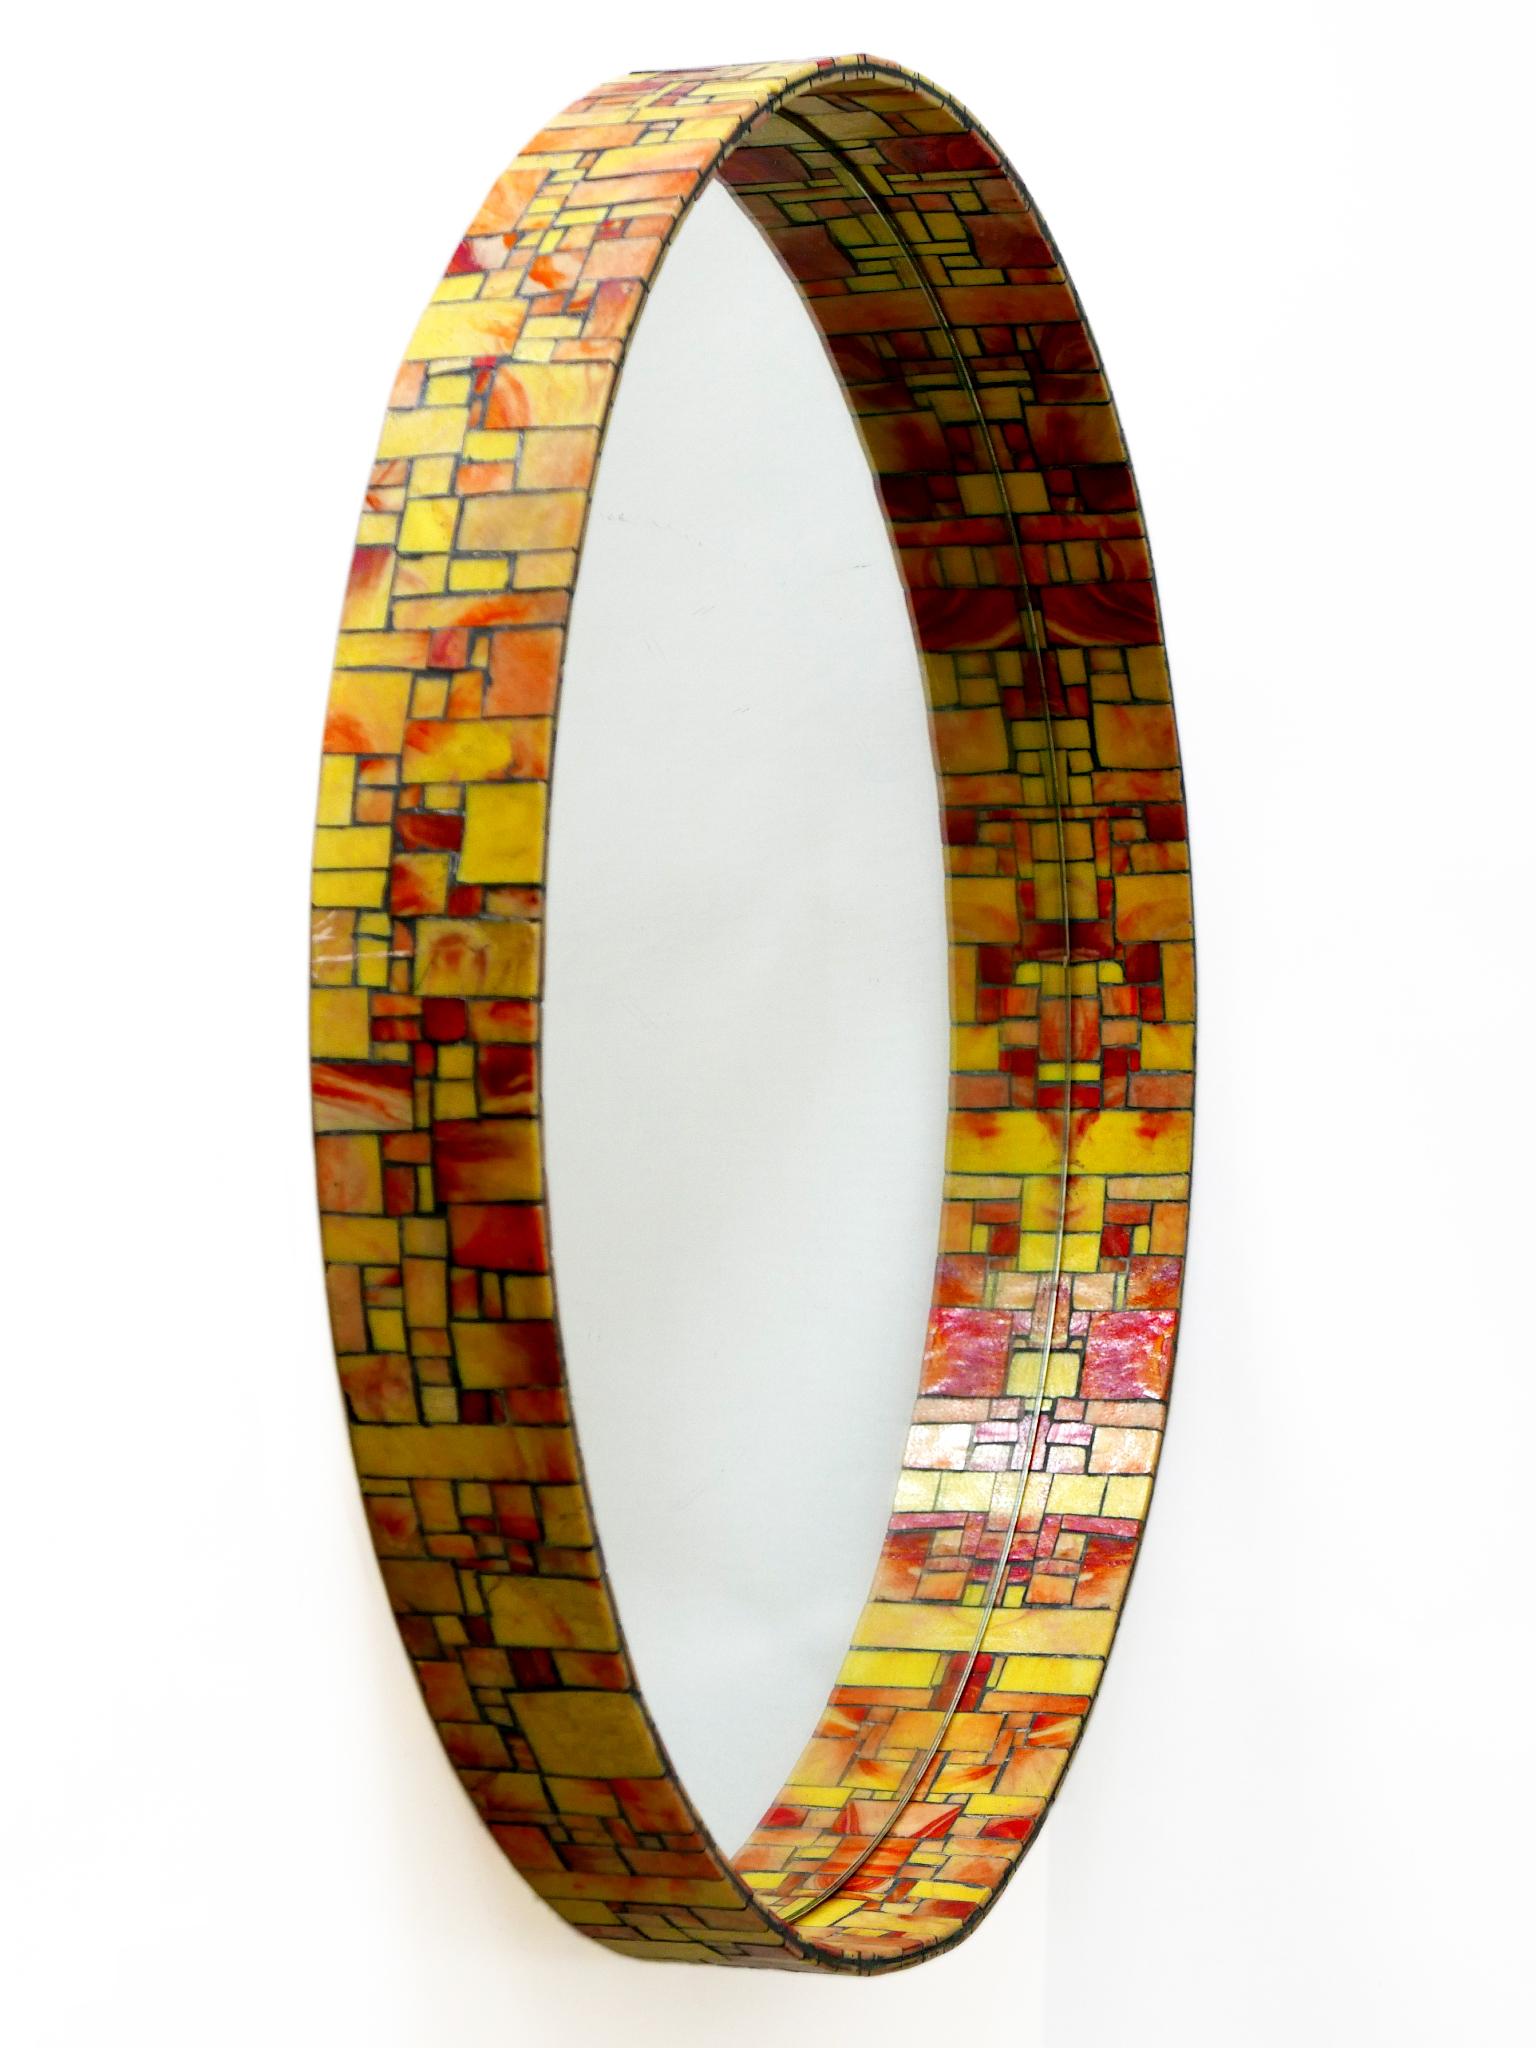 Exceptional Mid-Century Modern Mosaic Framed Circular Wall Mirror, Italy, 1960s In Good Condition For Sale In Munich, DE